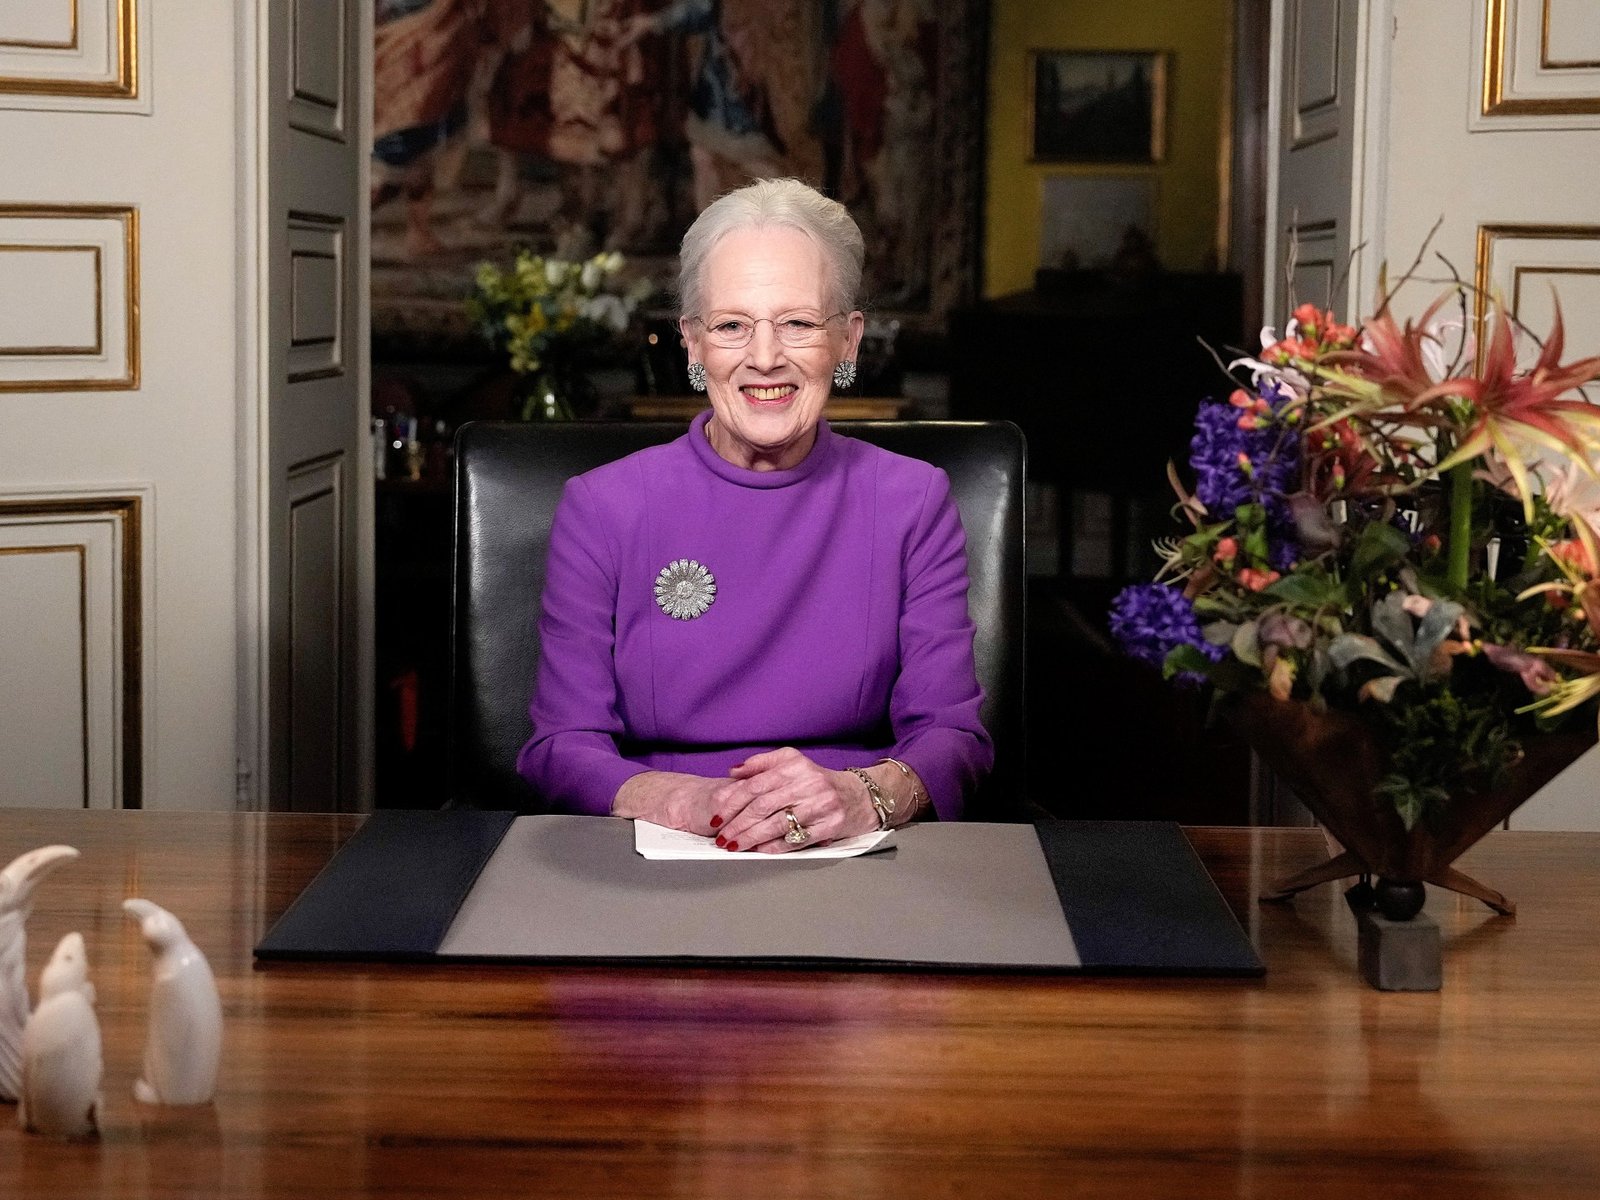 Denmarks Queen Margrethe II to abdicate after 52 years on the throne | News